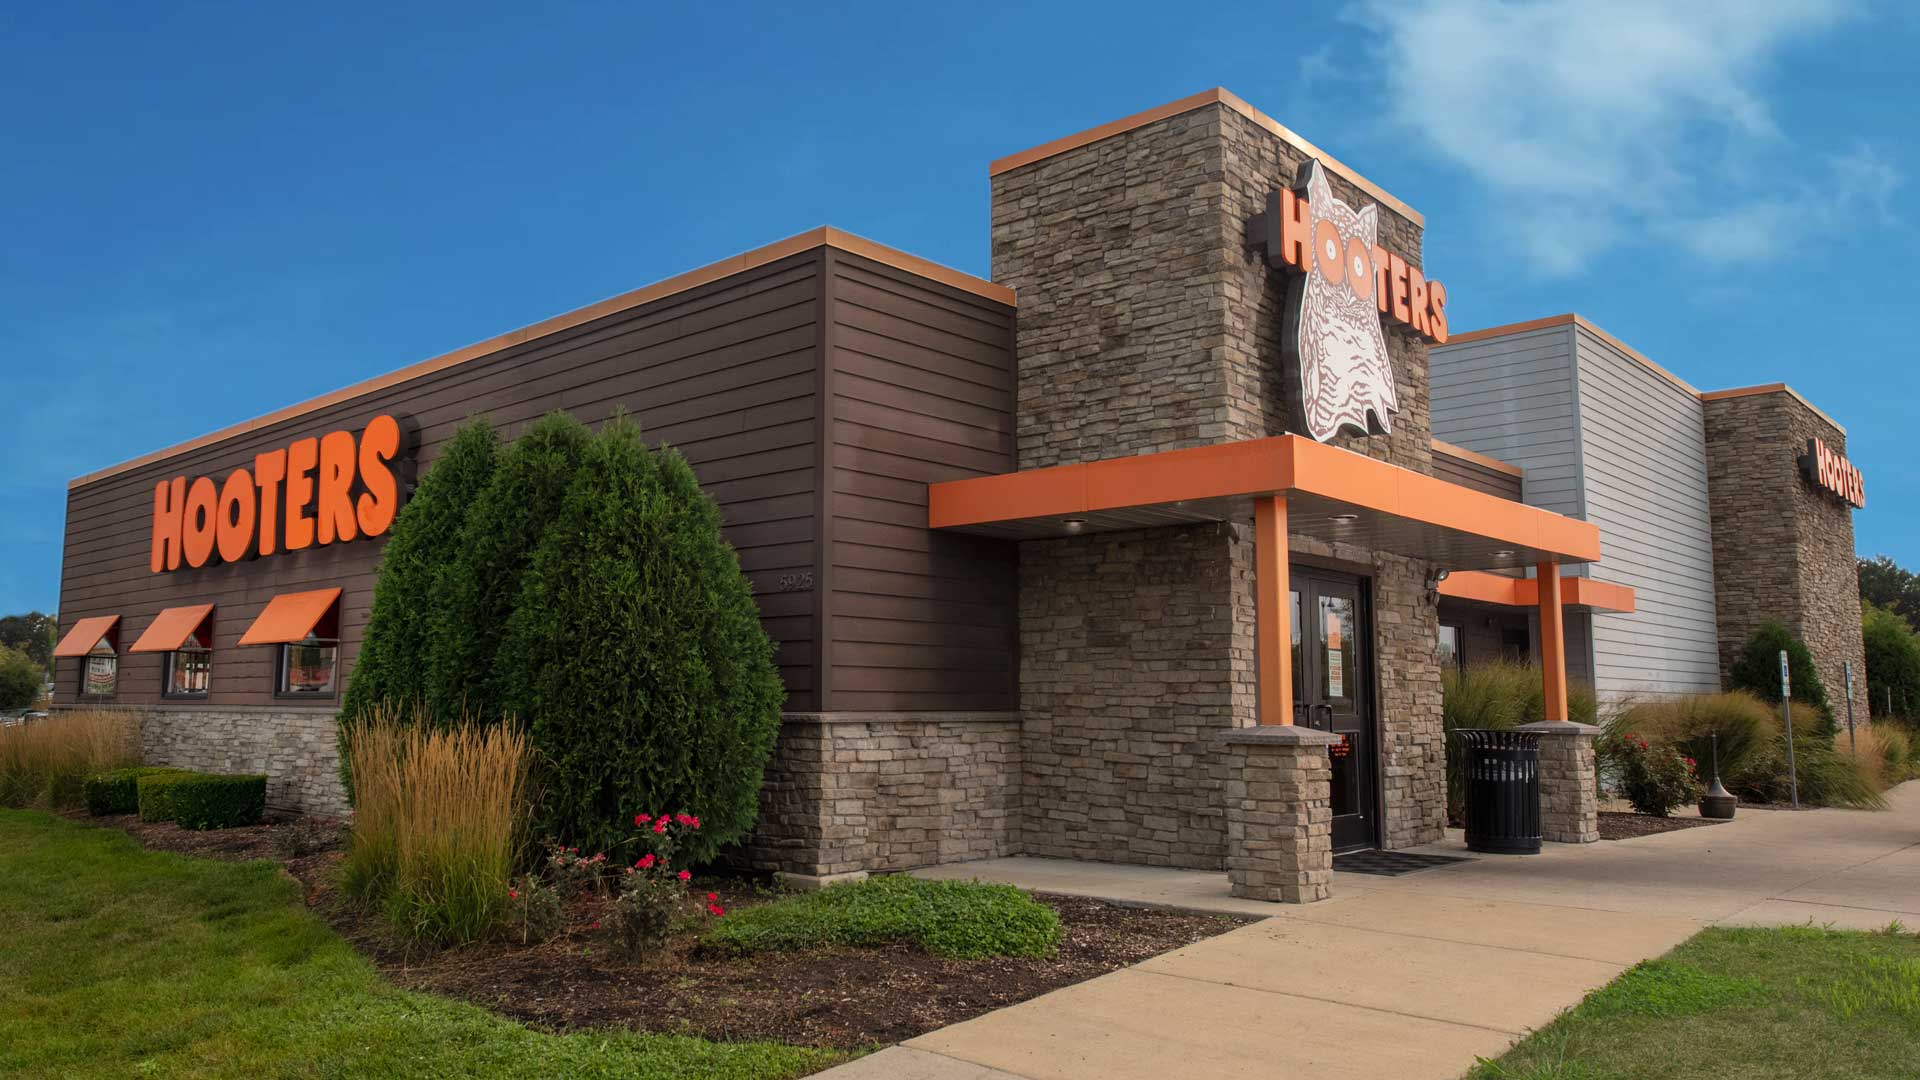 Hooters - Countryside, IL - Exterior